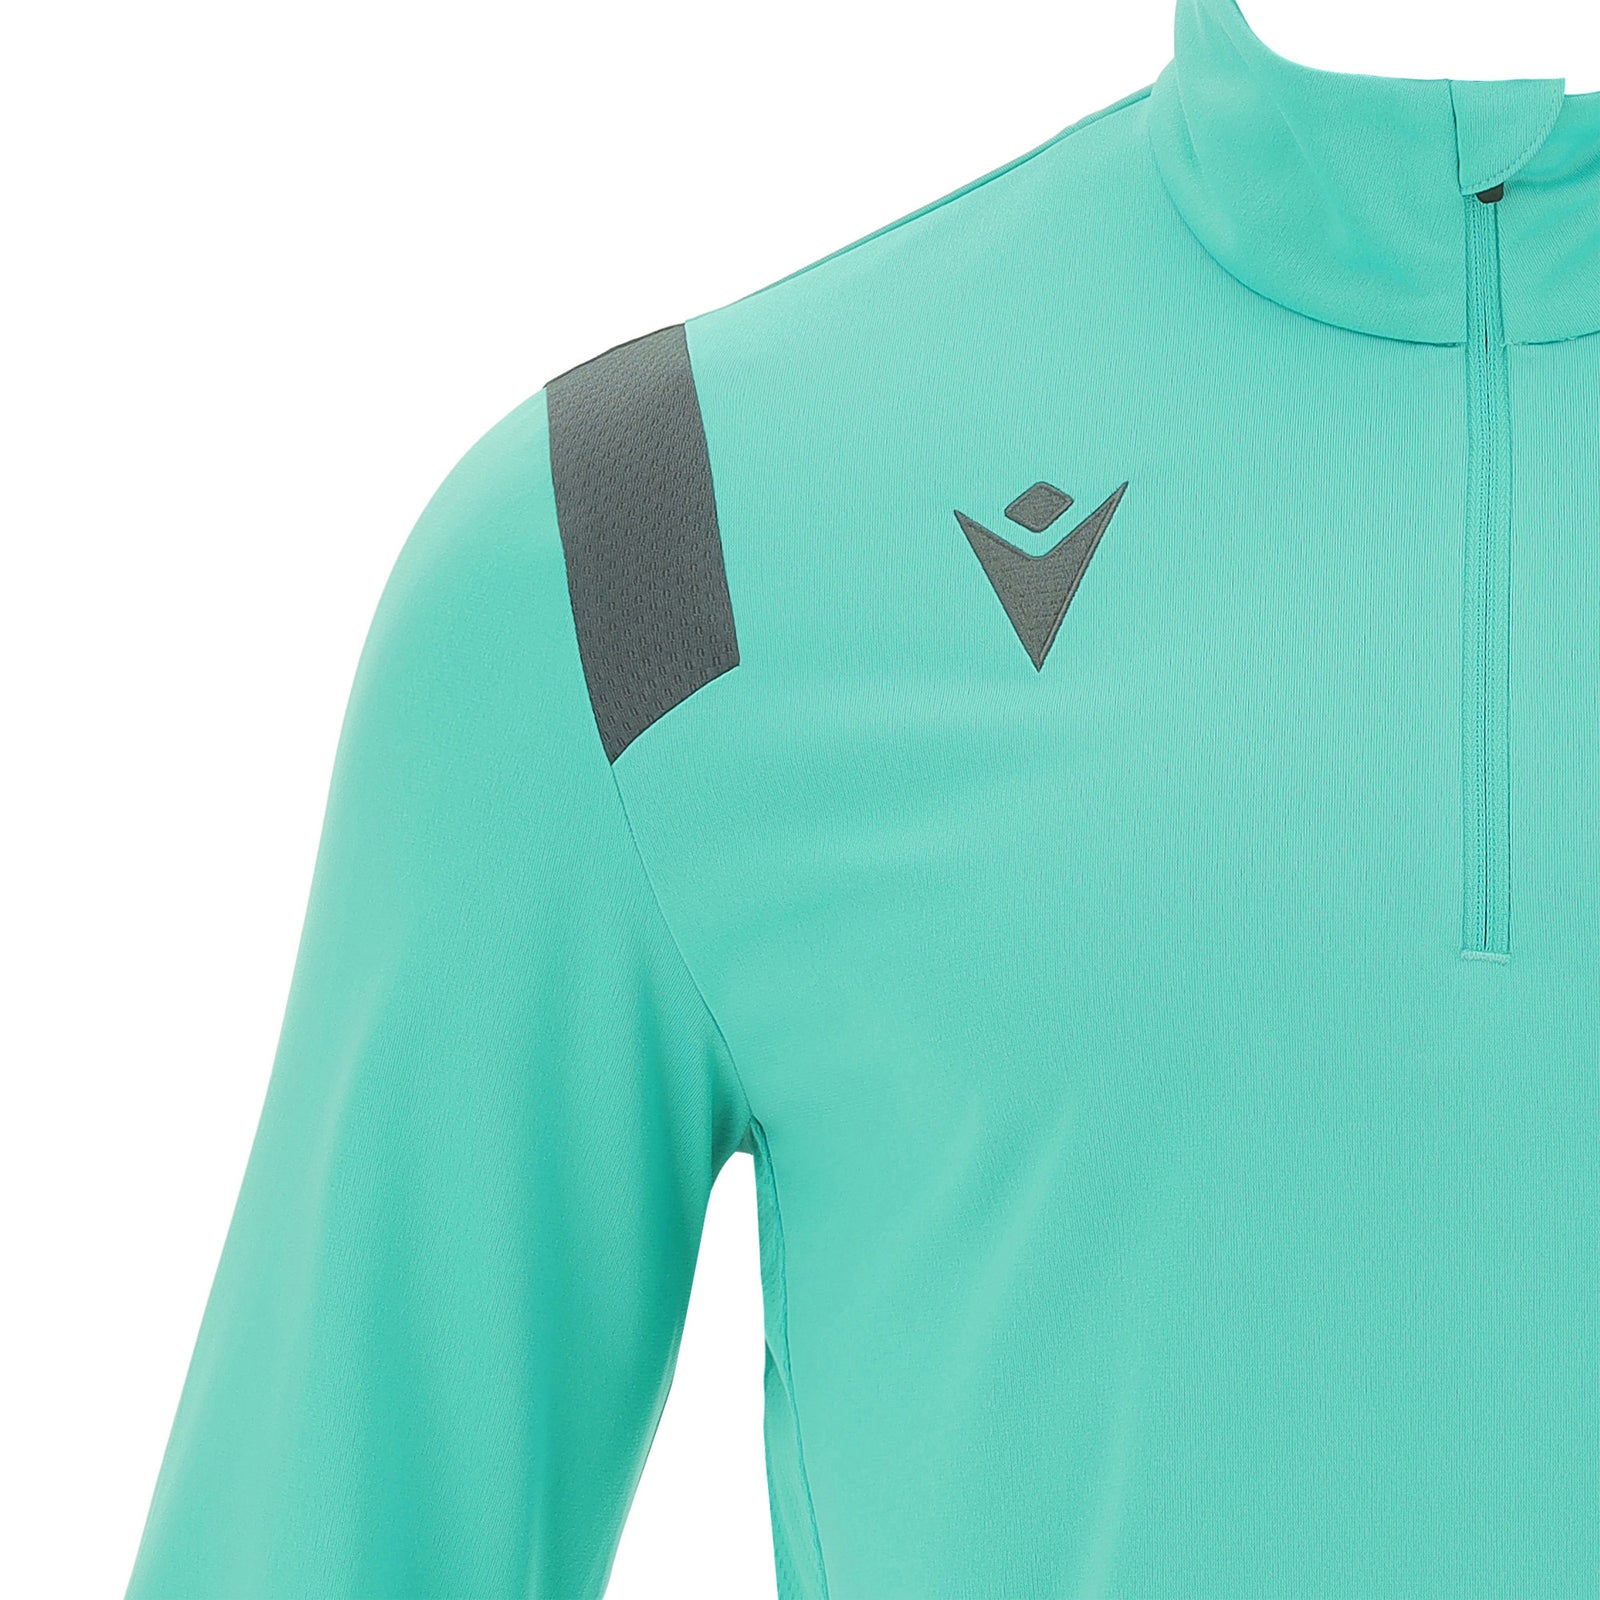 Photo of the Irish Squash 'Gange' 1/4 Zip Tracksuit Top in Turquoise, close up of shoulder detail, with Macron embroidered logo